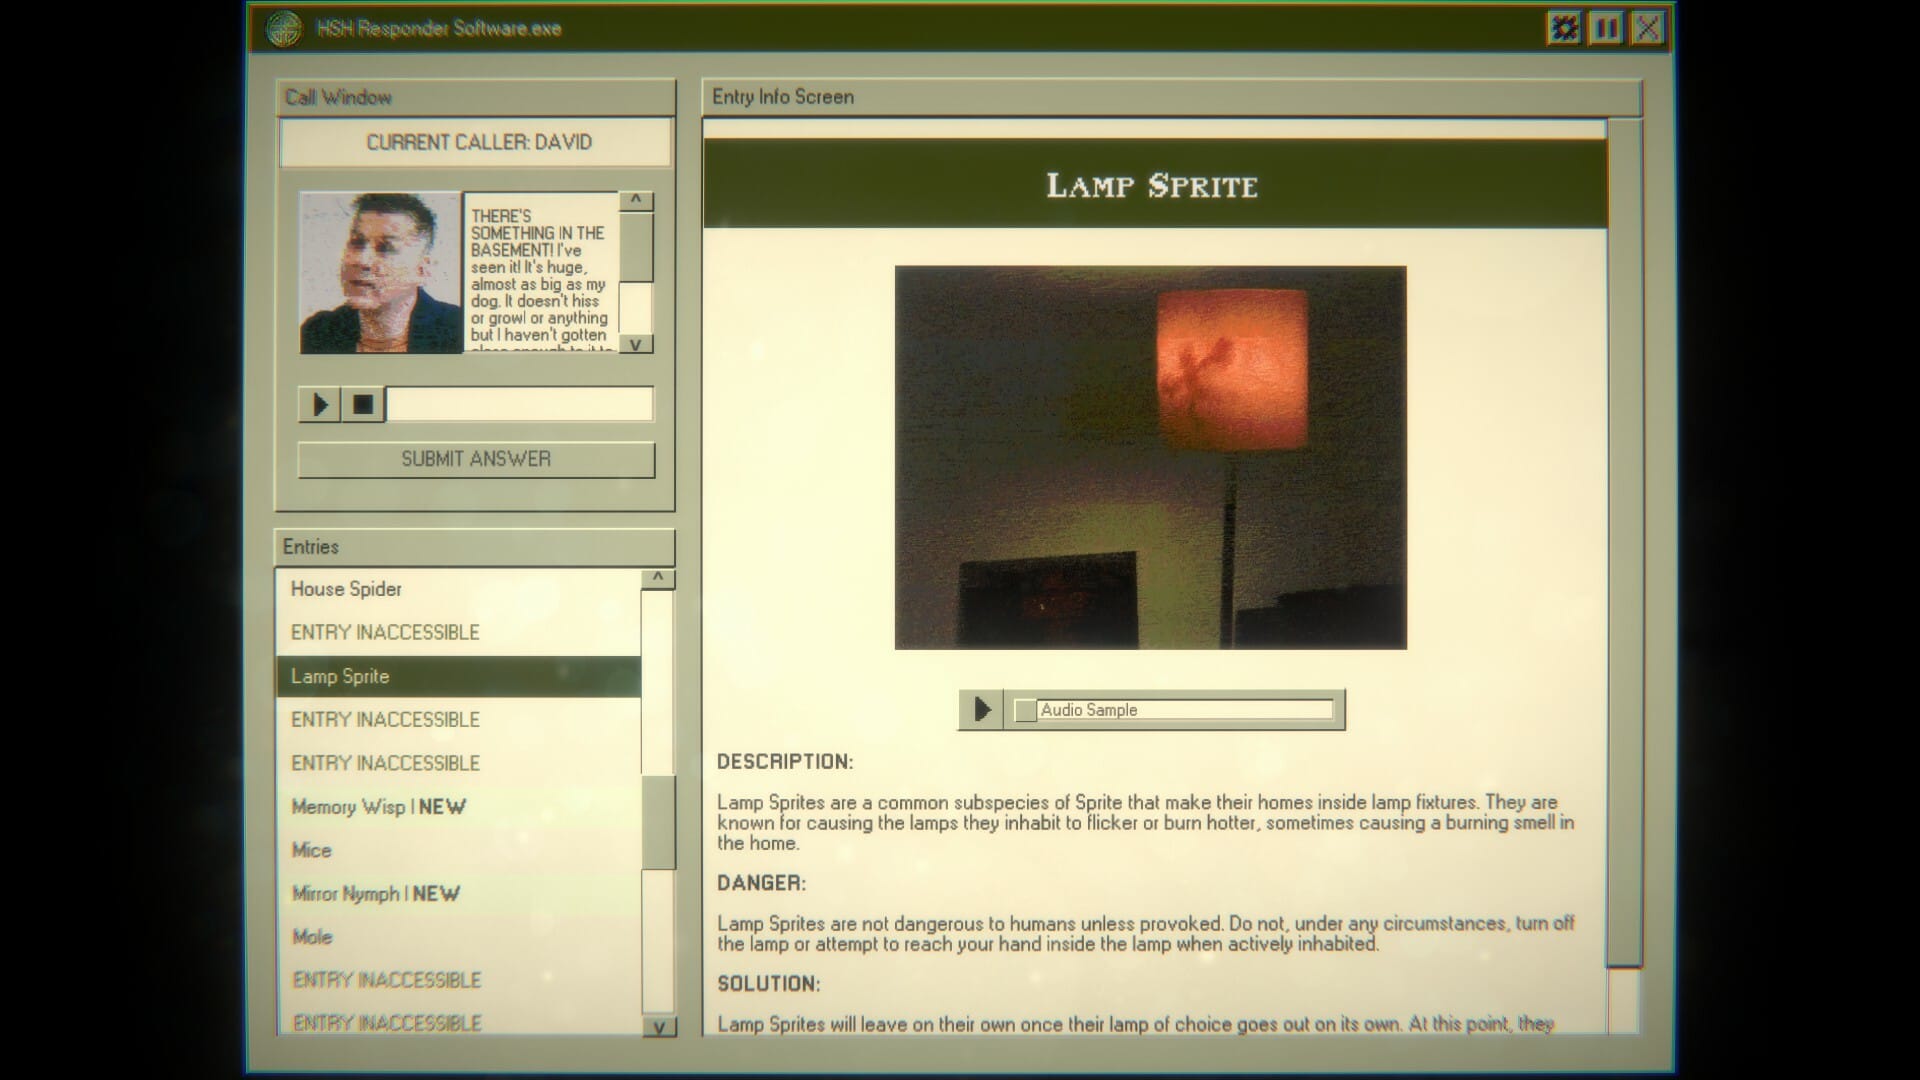 A screenshot from the video game Home Safety Hotline showing an entry on the Lamp Sprite.